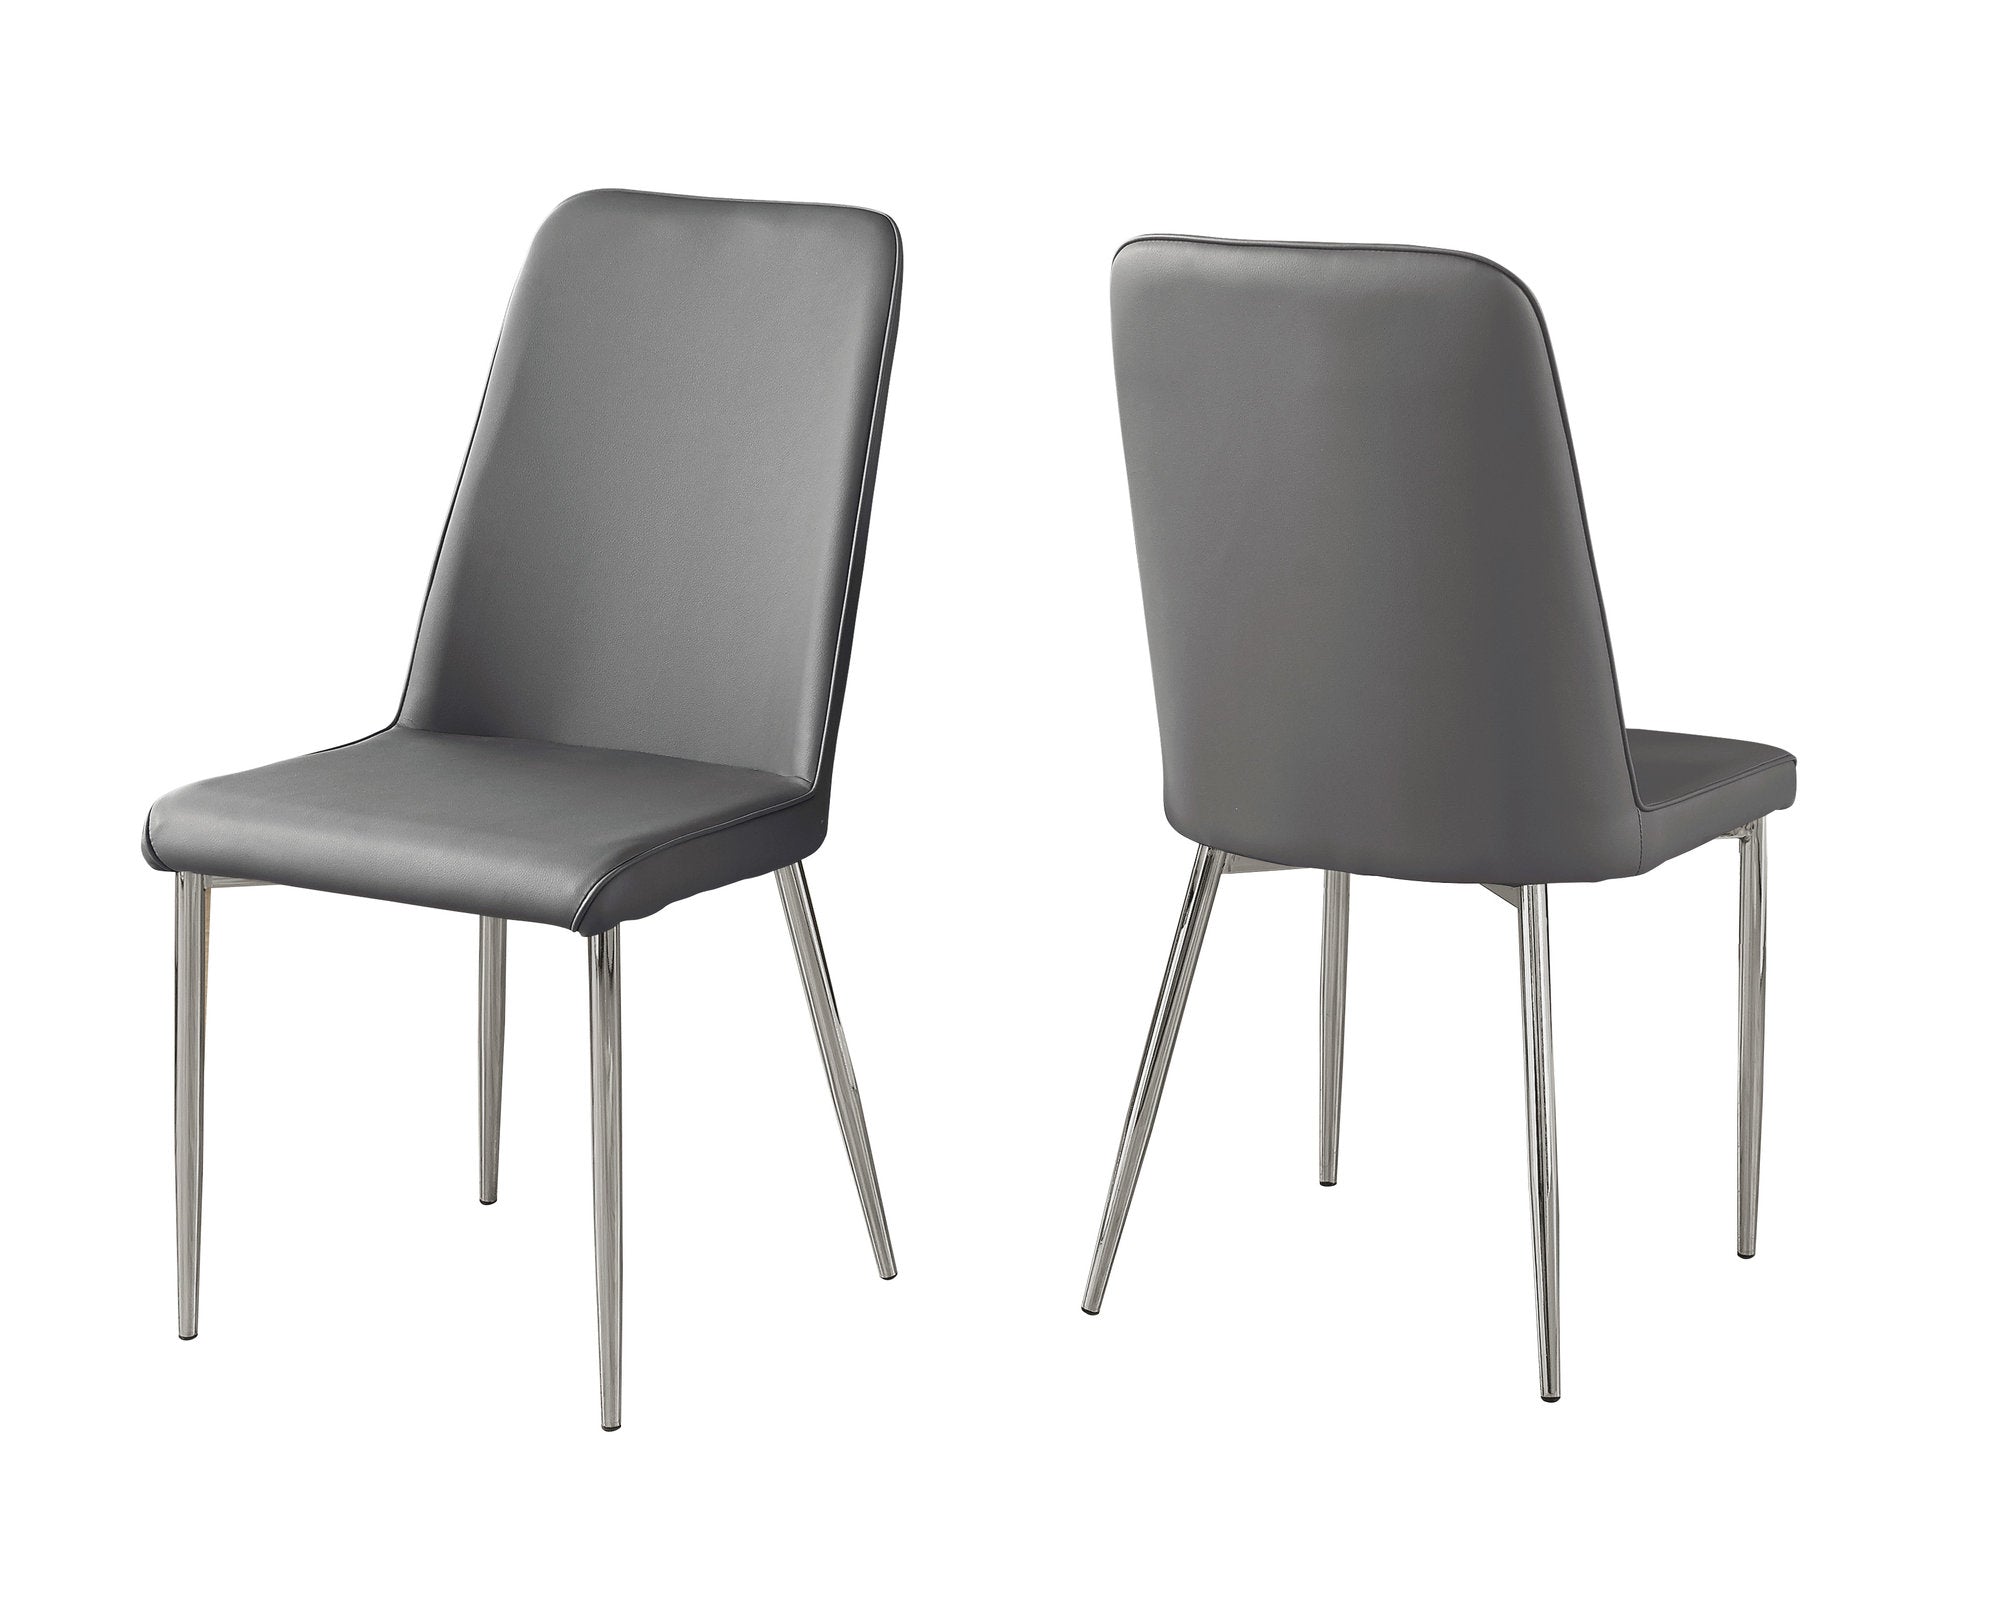 Dining Chair - 2Pcs / 37H / Grey Leather-Look / Chrome